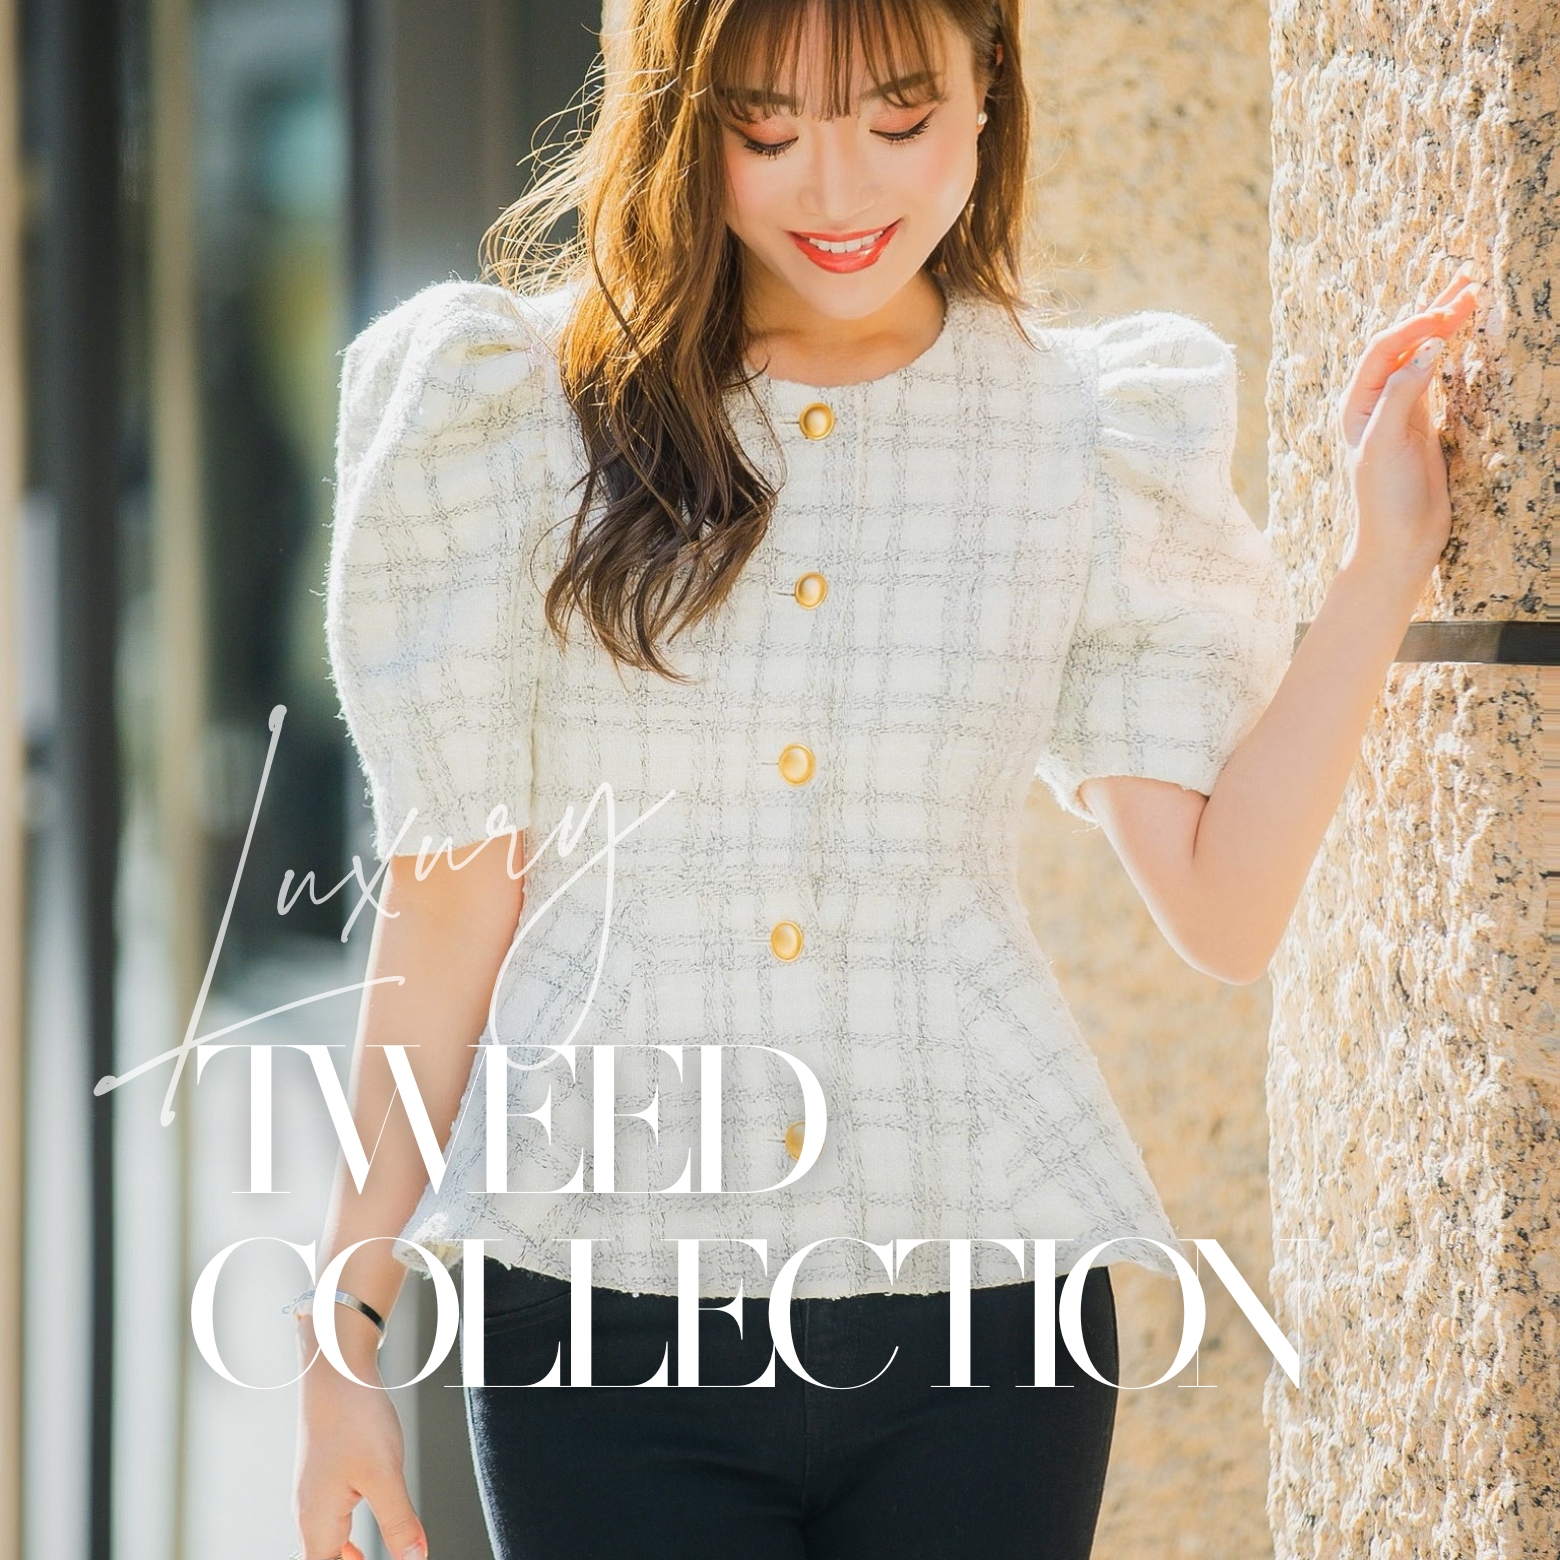 tweed collection